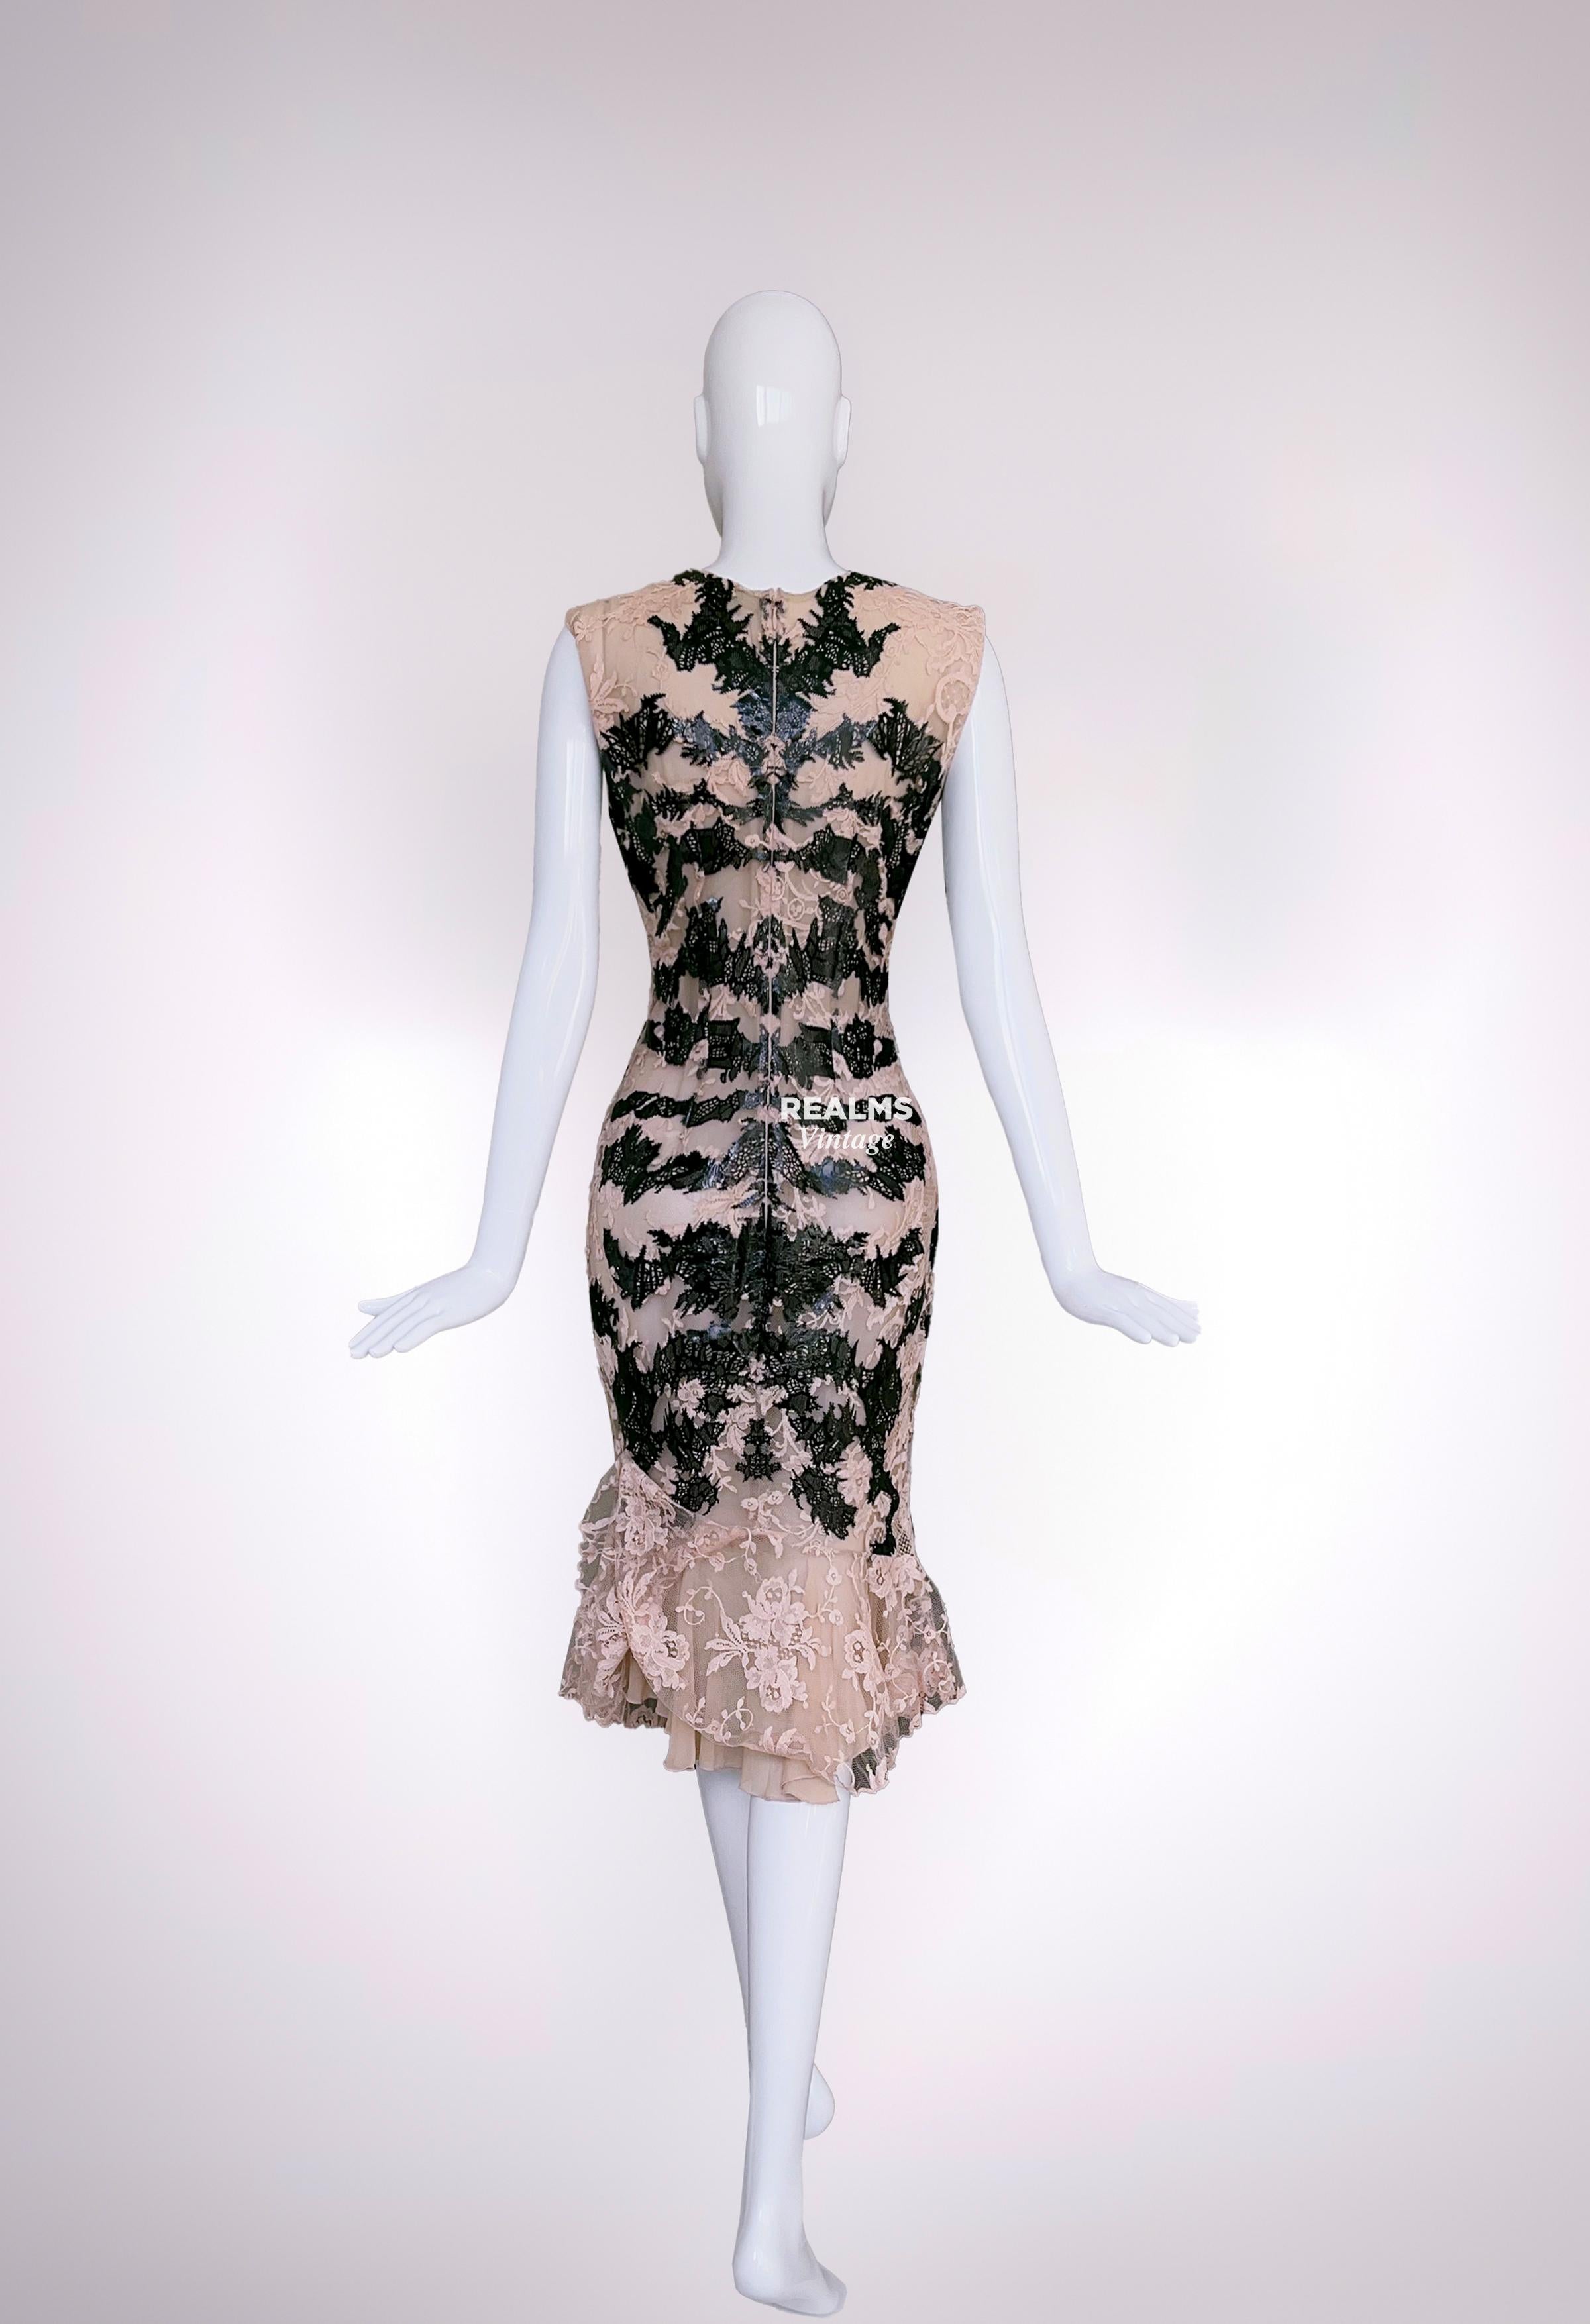 Iconic Archival Alexander McQueen SS 2012 Laser Cut Silk Lace Dress For Sale 4